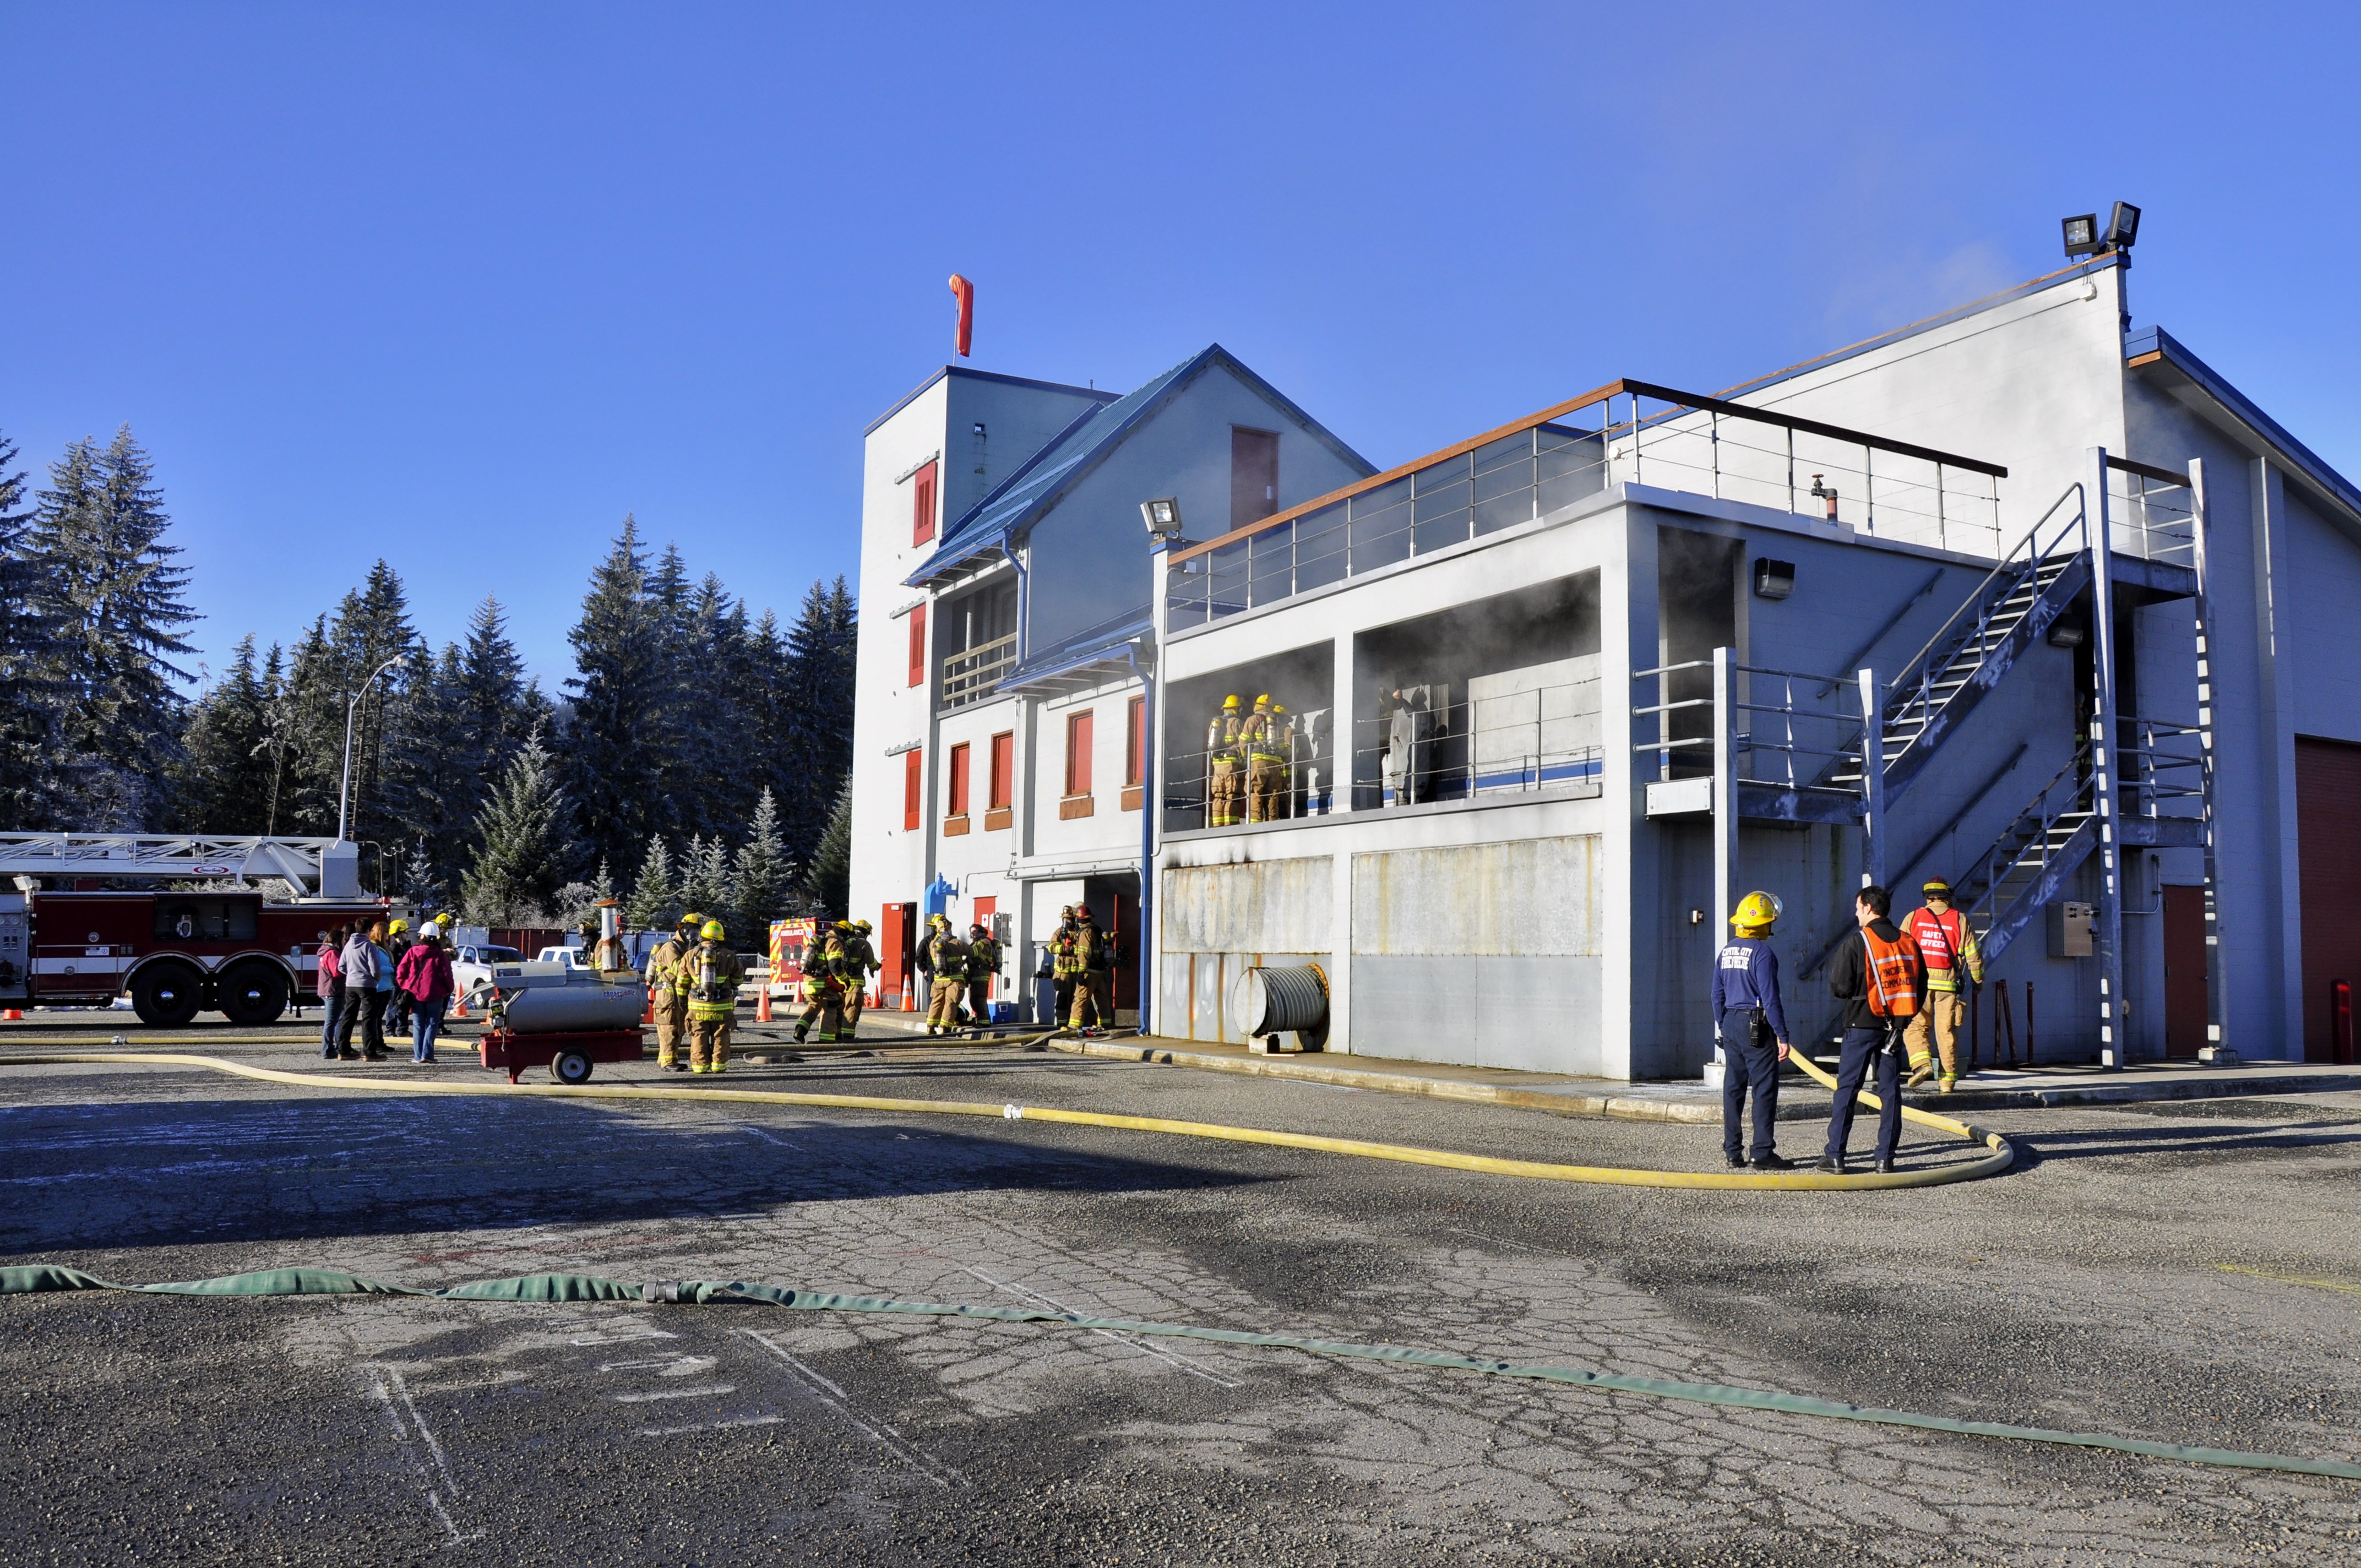 Participants complete search and rescue and fire attack training at Hagevig Fire Training Center on Saturday, Feb. 1. Photo by Annie Bartholomew/KTOO